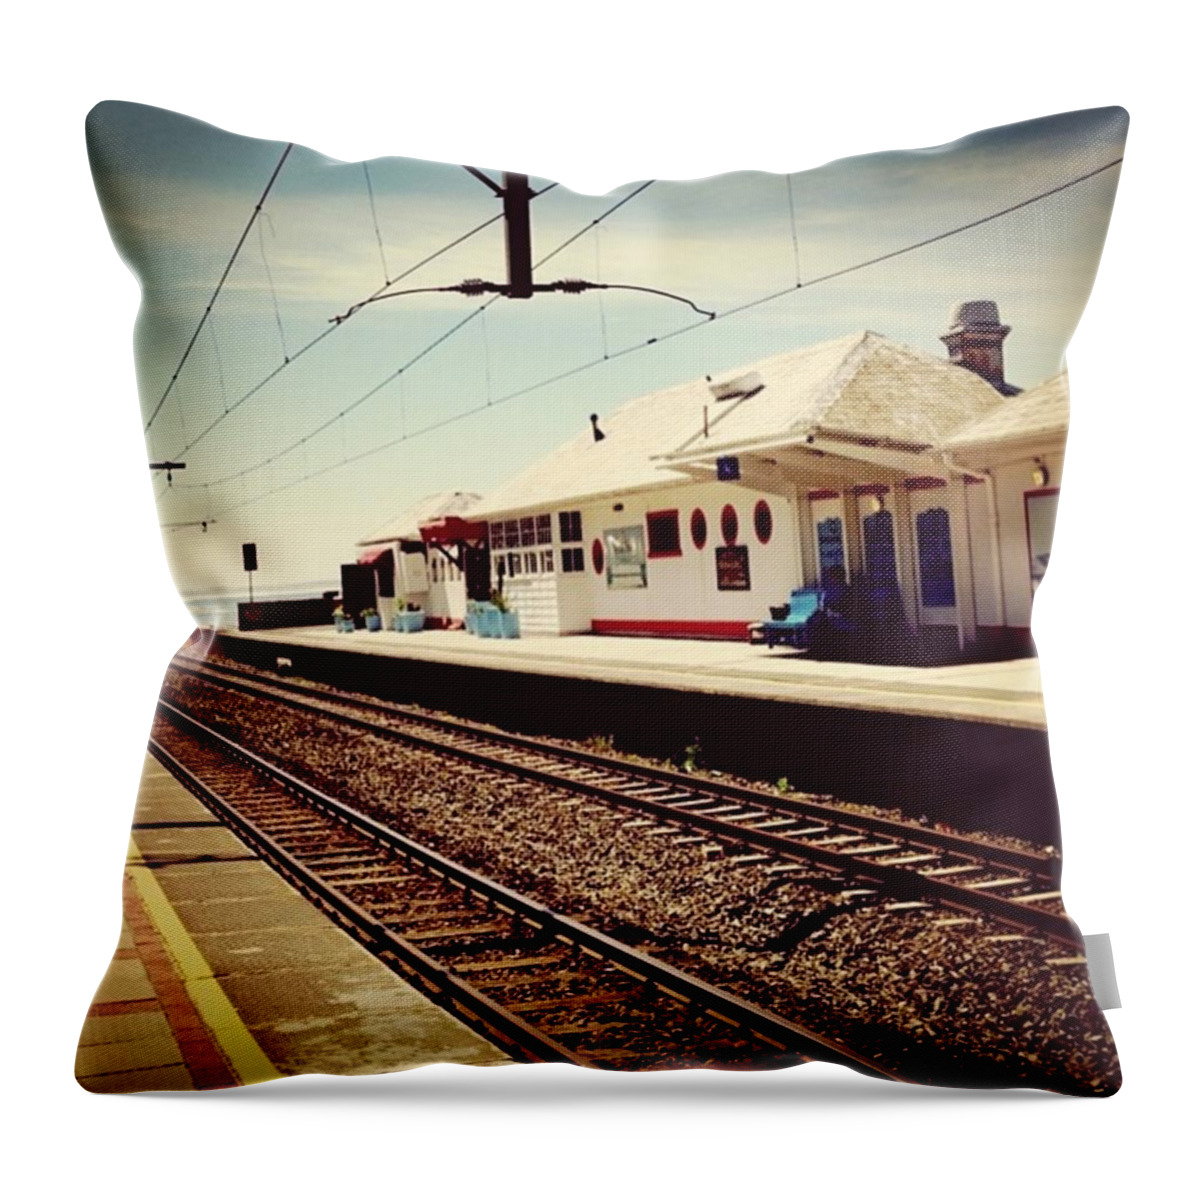 Train Throw Pillow featuring the photograph At The Station by Jacci Freimond Rudling